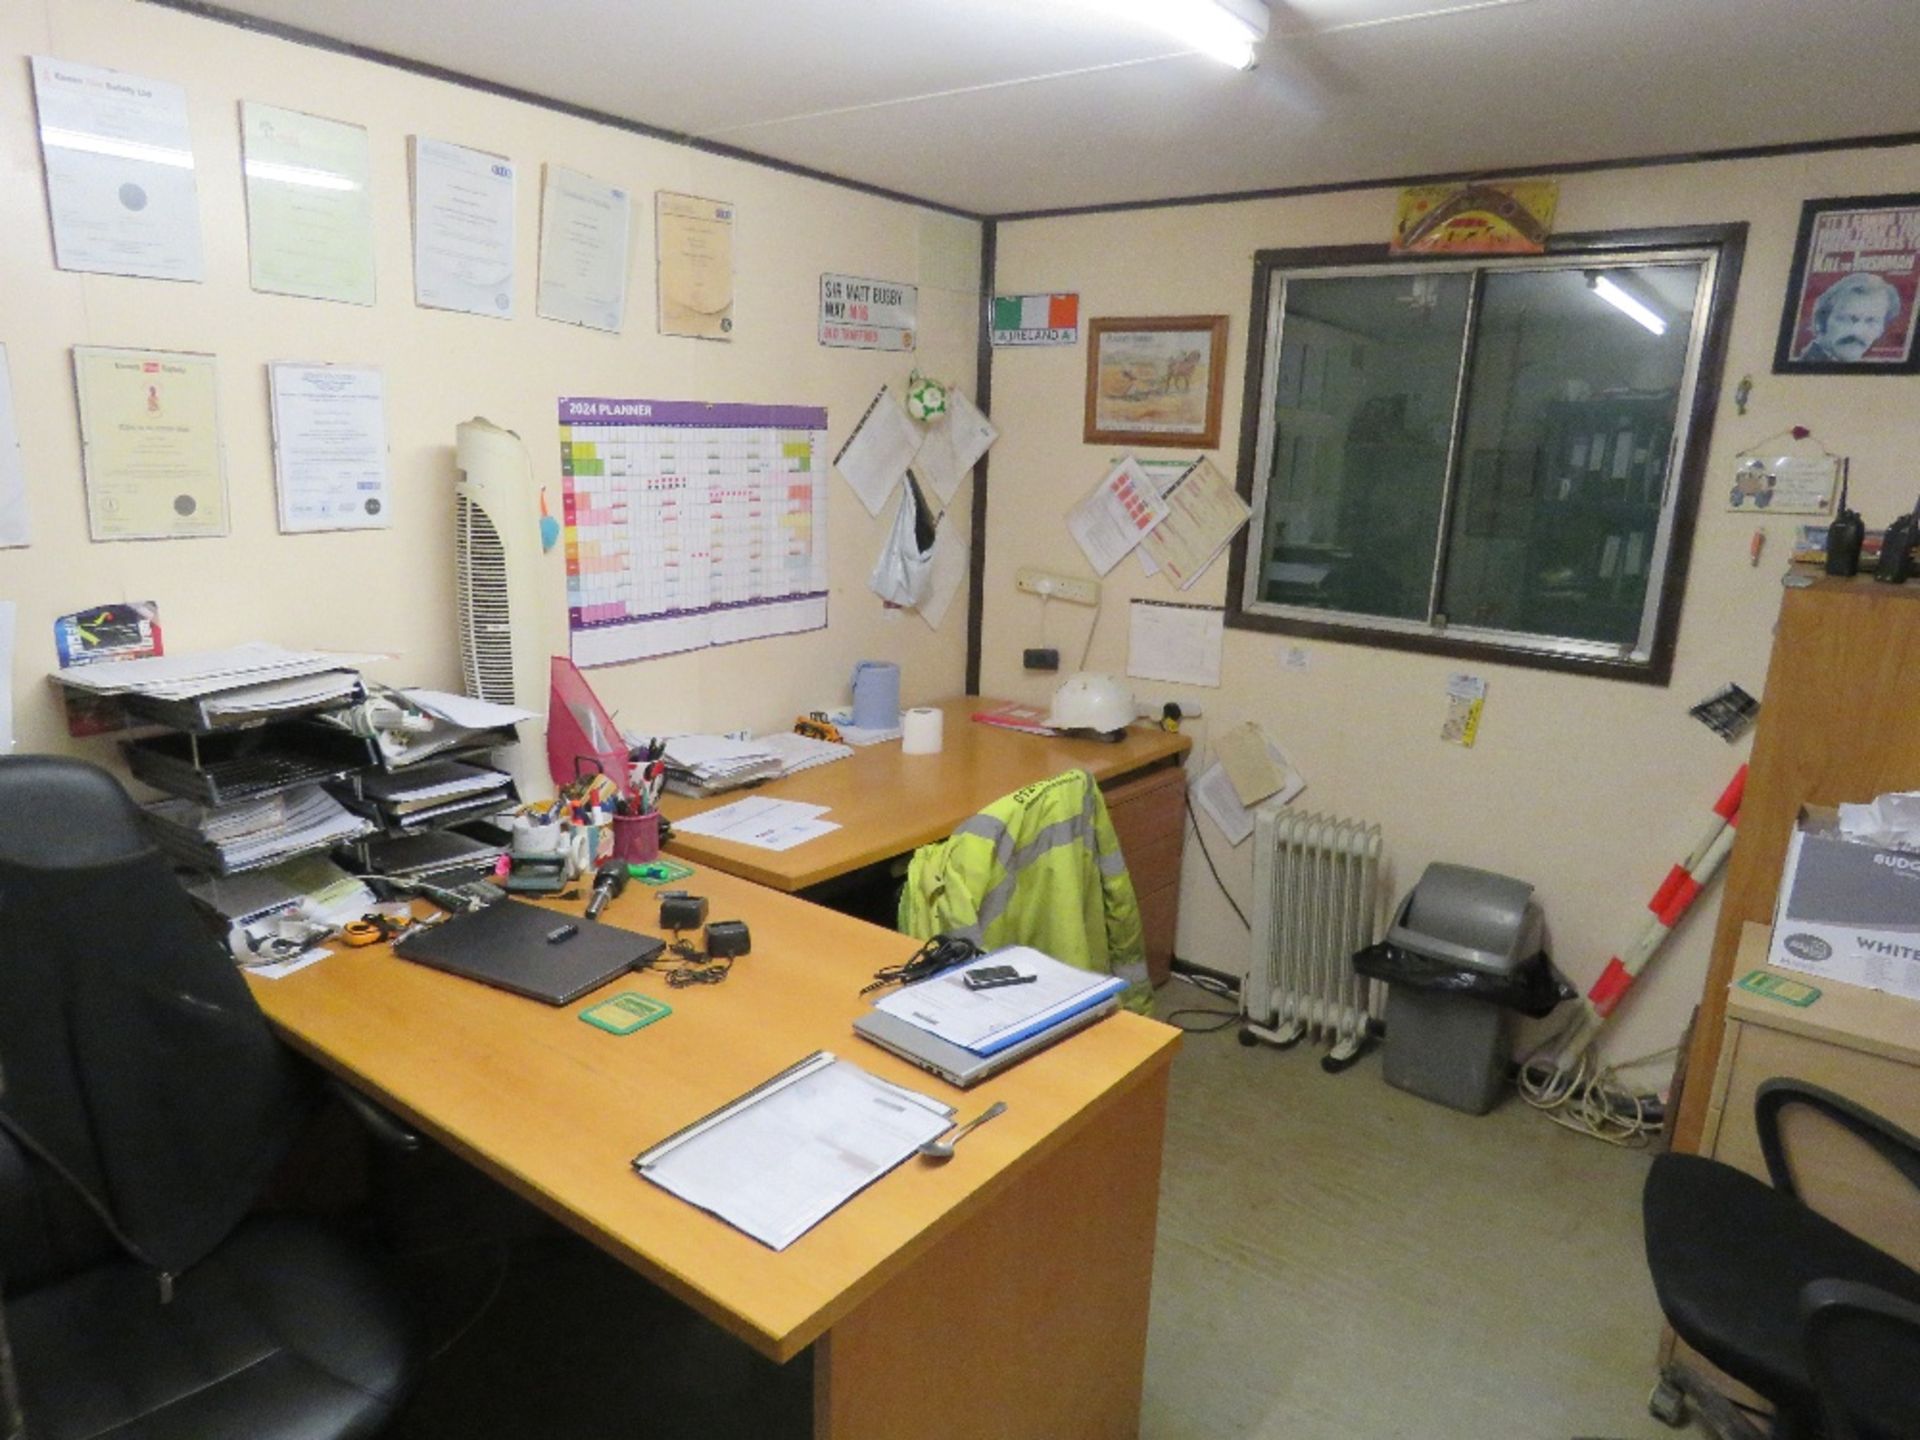 PORTABLE SITE OFFICE 32FT X 10FT APPROX WITH SMALL KITCHEN AREA AT ONE END. 60/40 SPLIT APPROX AS SH - Image 6 of 8